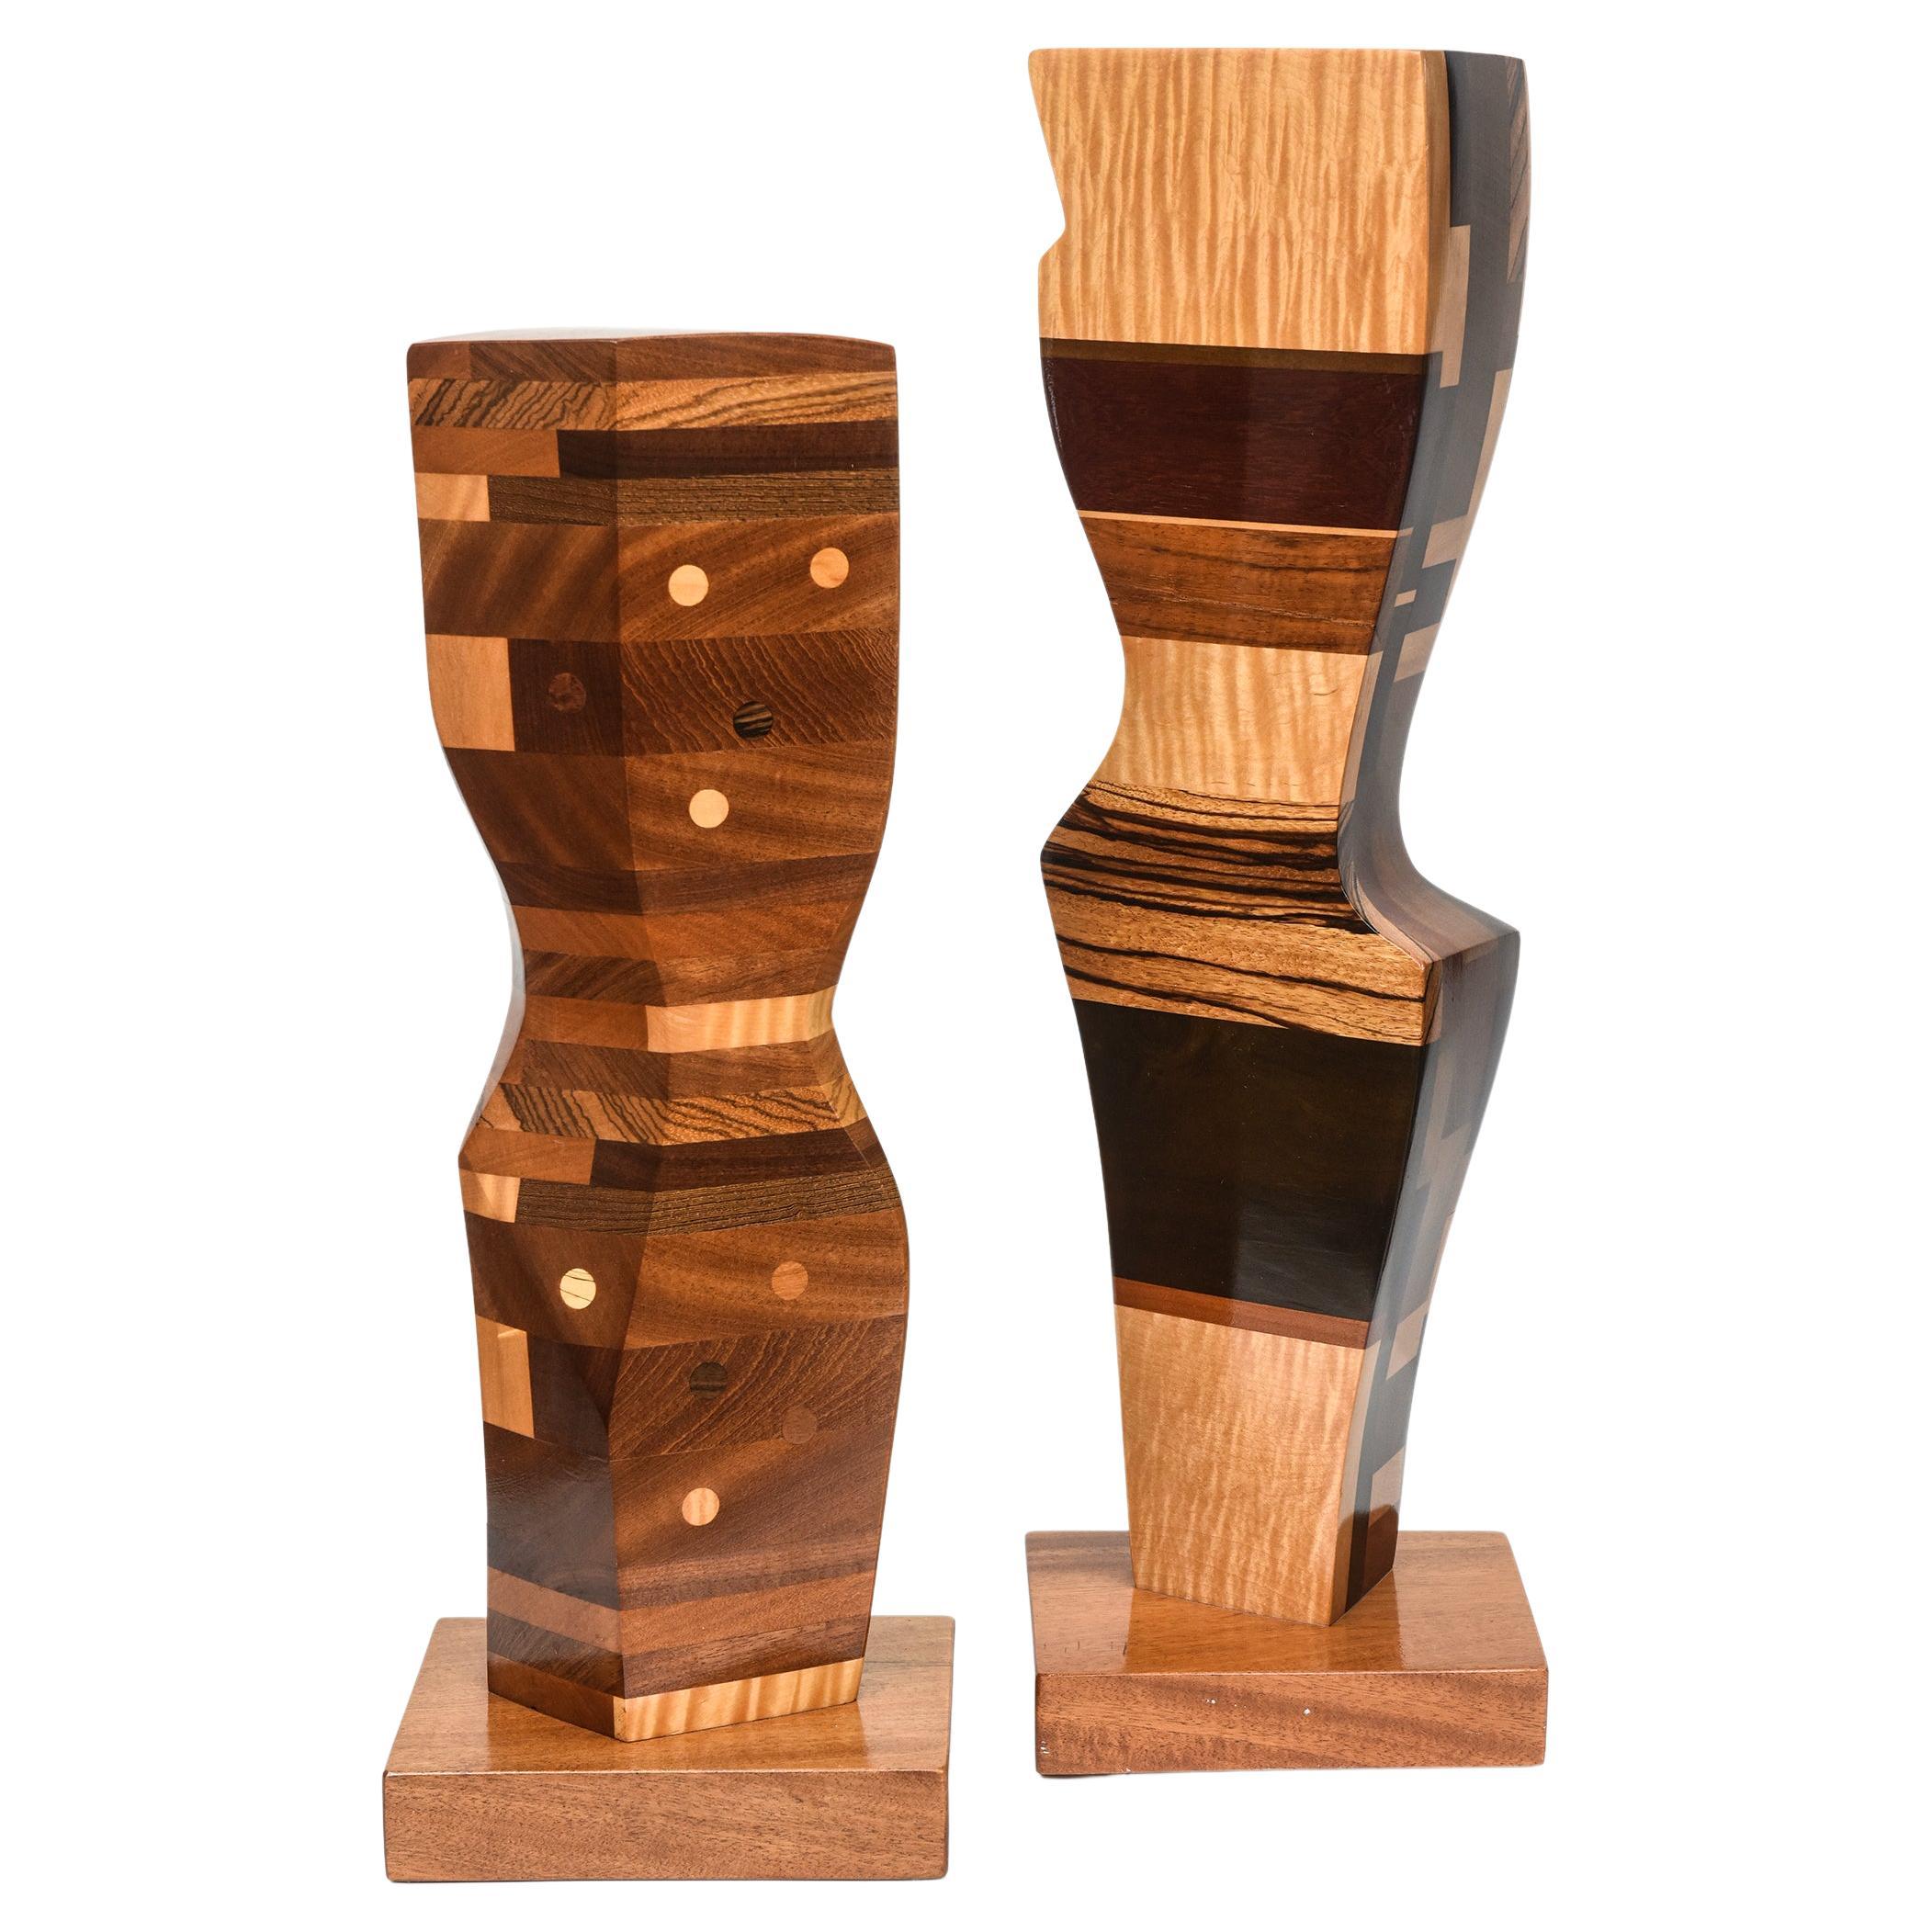 Two Modern Abstract Mixed Wood Studio Sculptures by Paul LaMontagne, C. 1980 For Sale